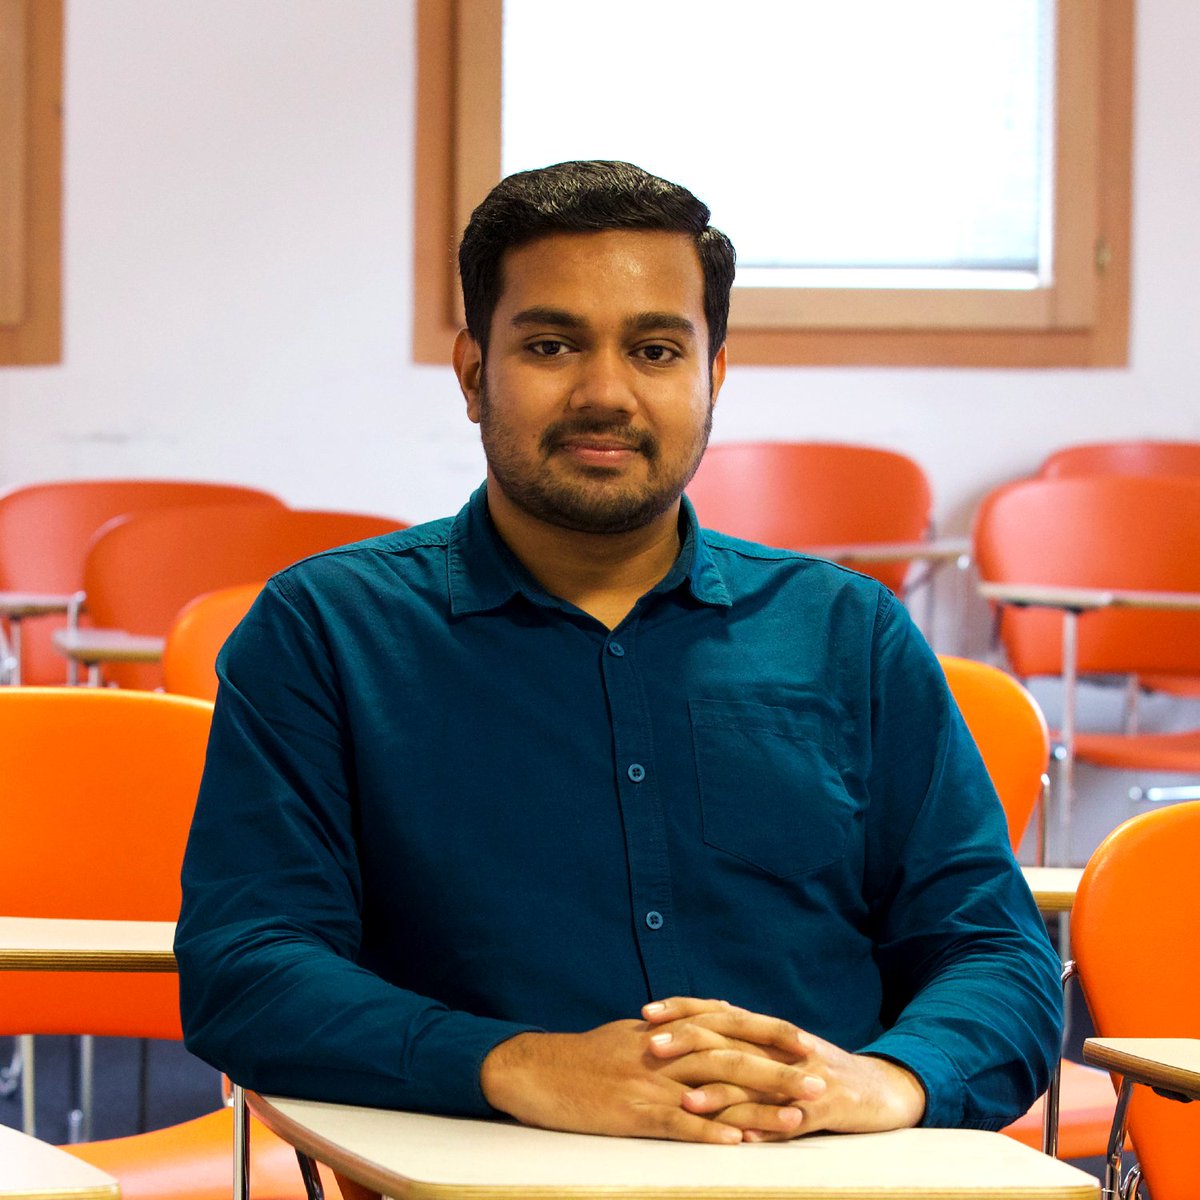 Our MSc Tourism and Hospitality student, Niloy Ahmed Prince Sikder joined us in an interview to share his experiences as an international student coming to the UK.

#WeAreSunLon #StudentEngagement #StudentSupport #Careers #UniversityLife